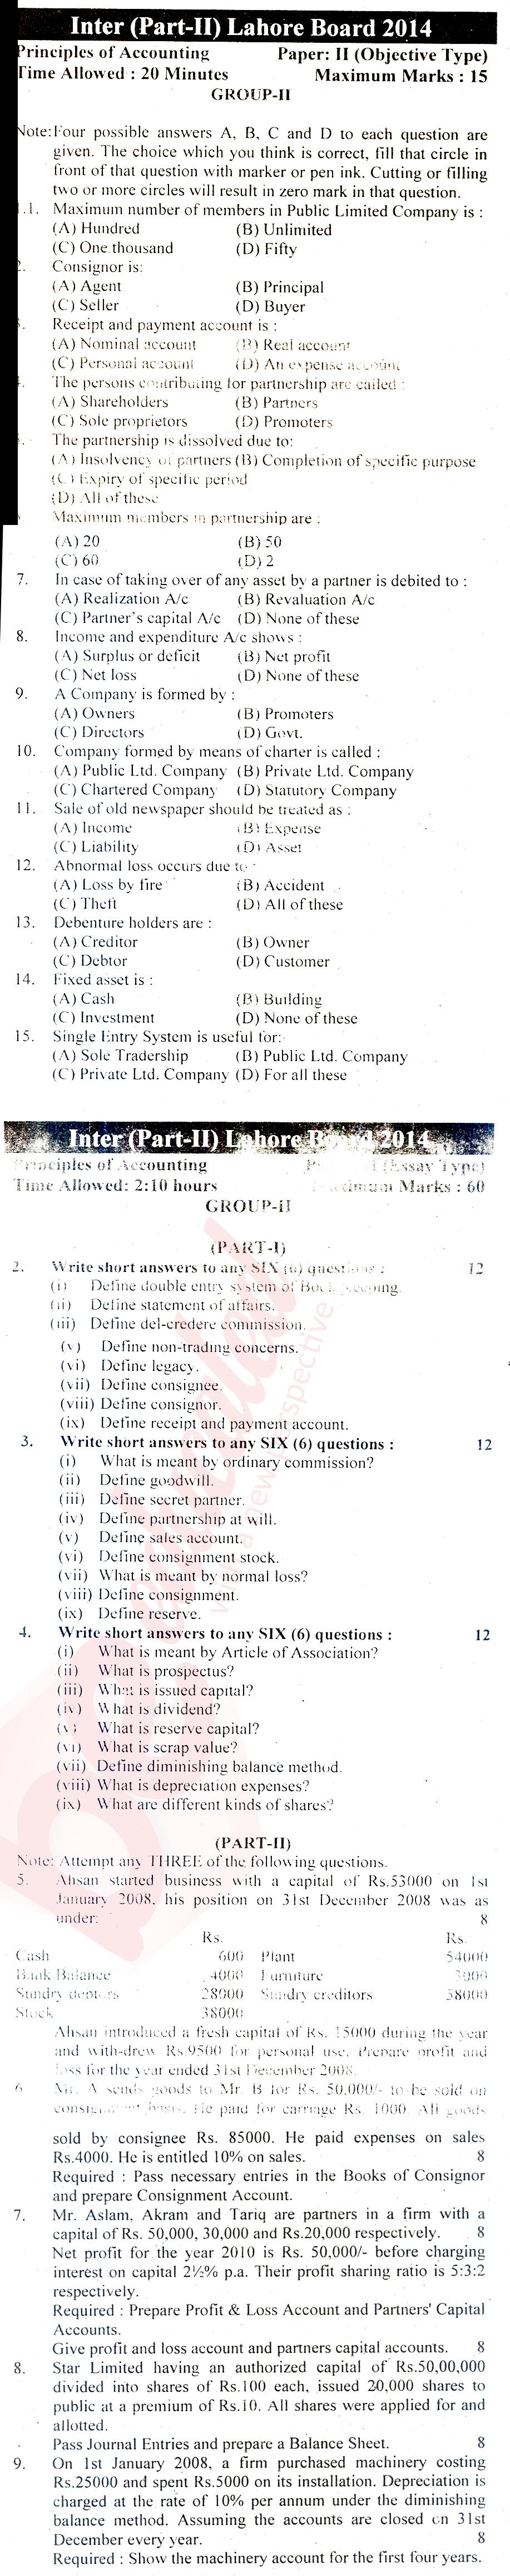 Principles of Accounting ICOM Part 2 Past Paper Group 2 BISE Lahore 2014